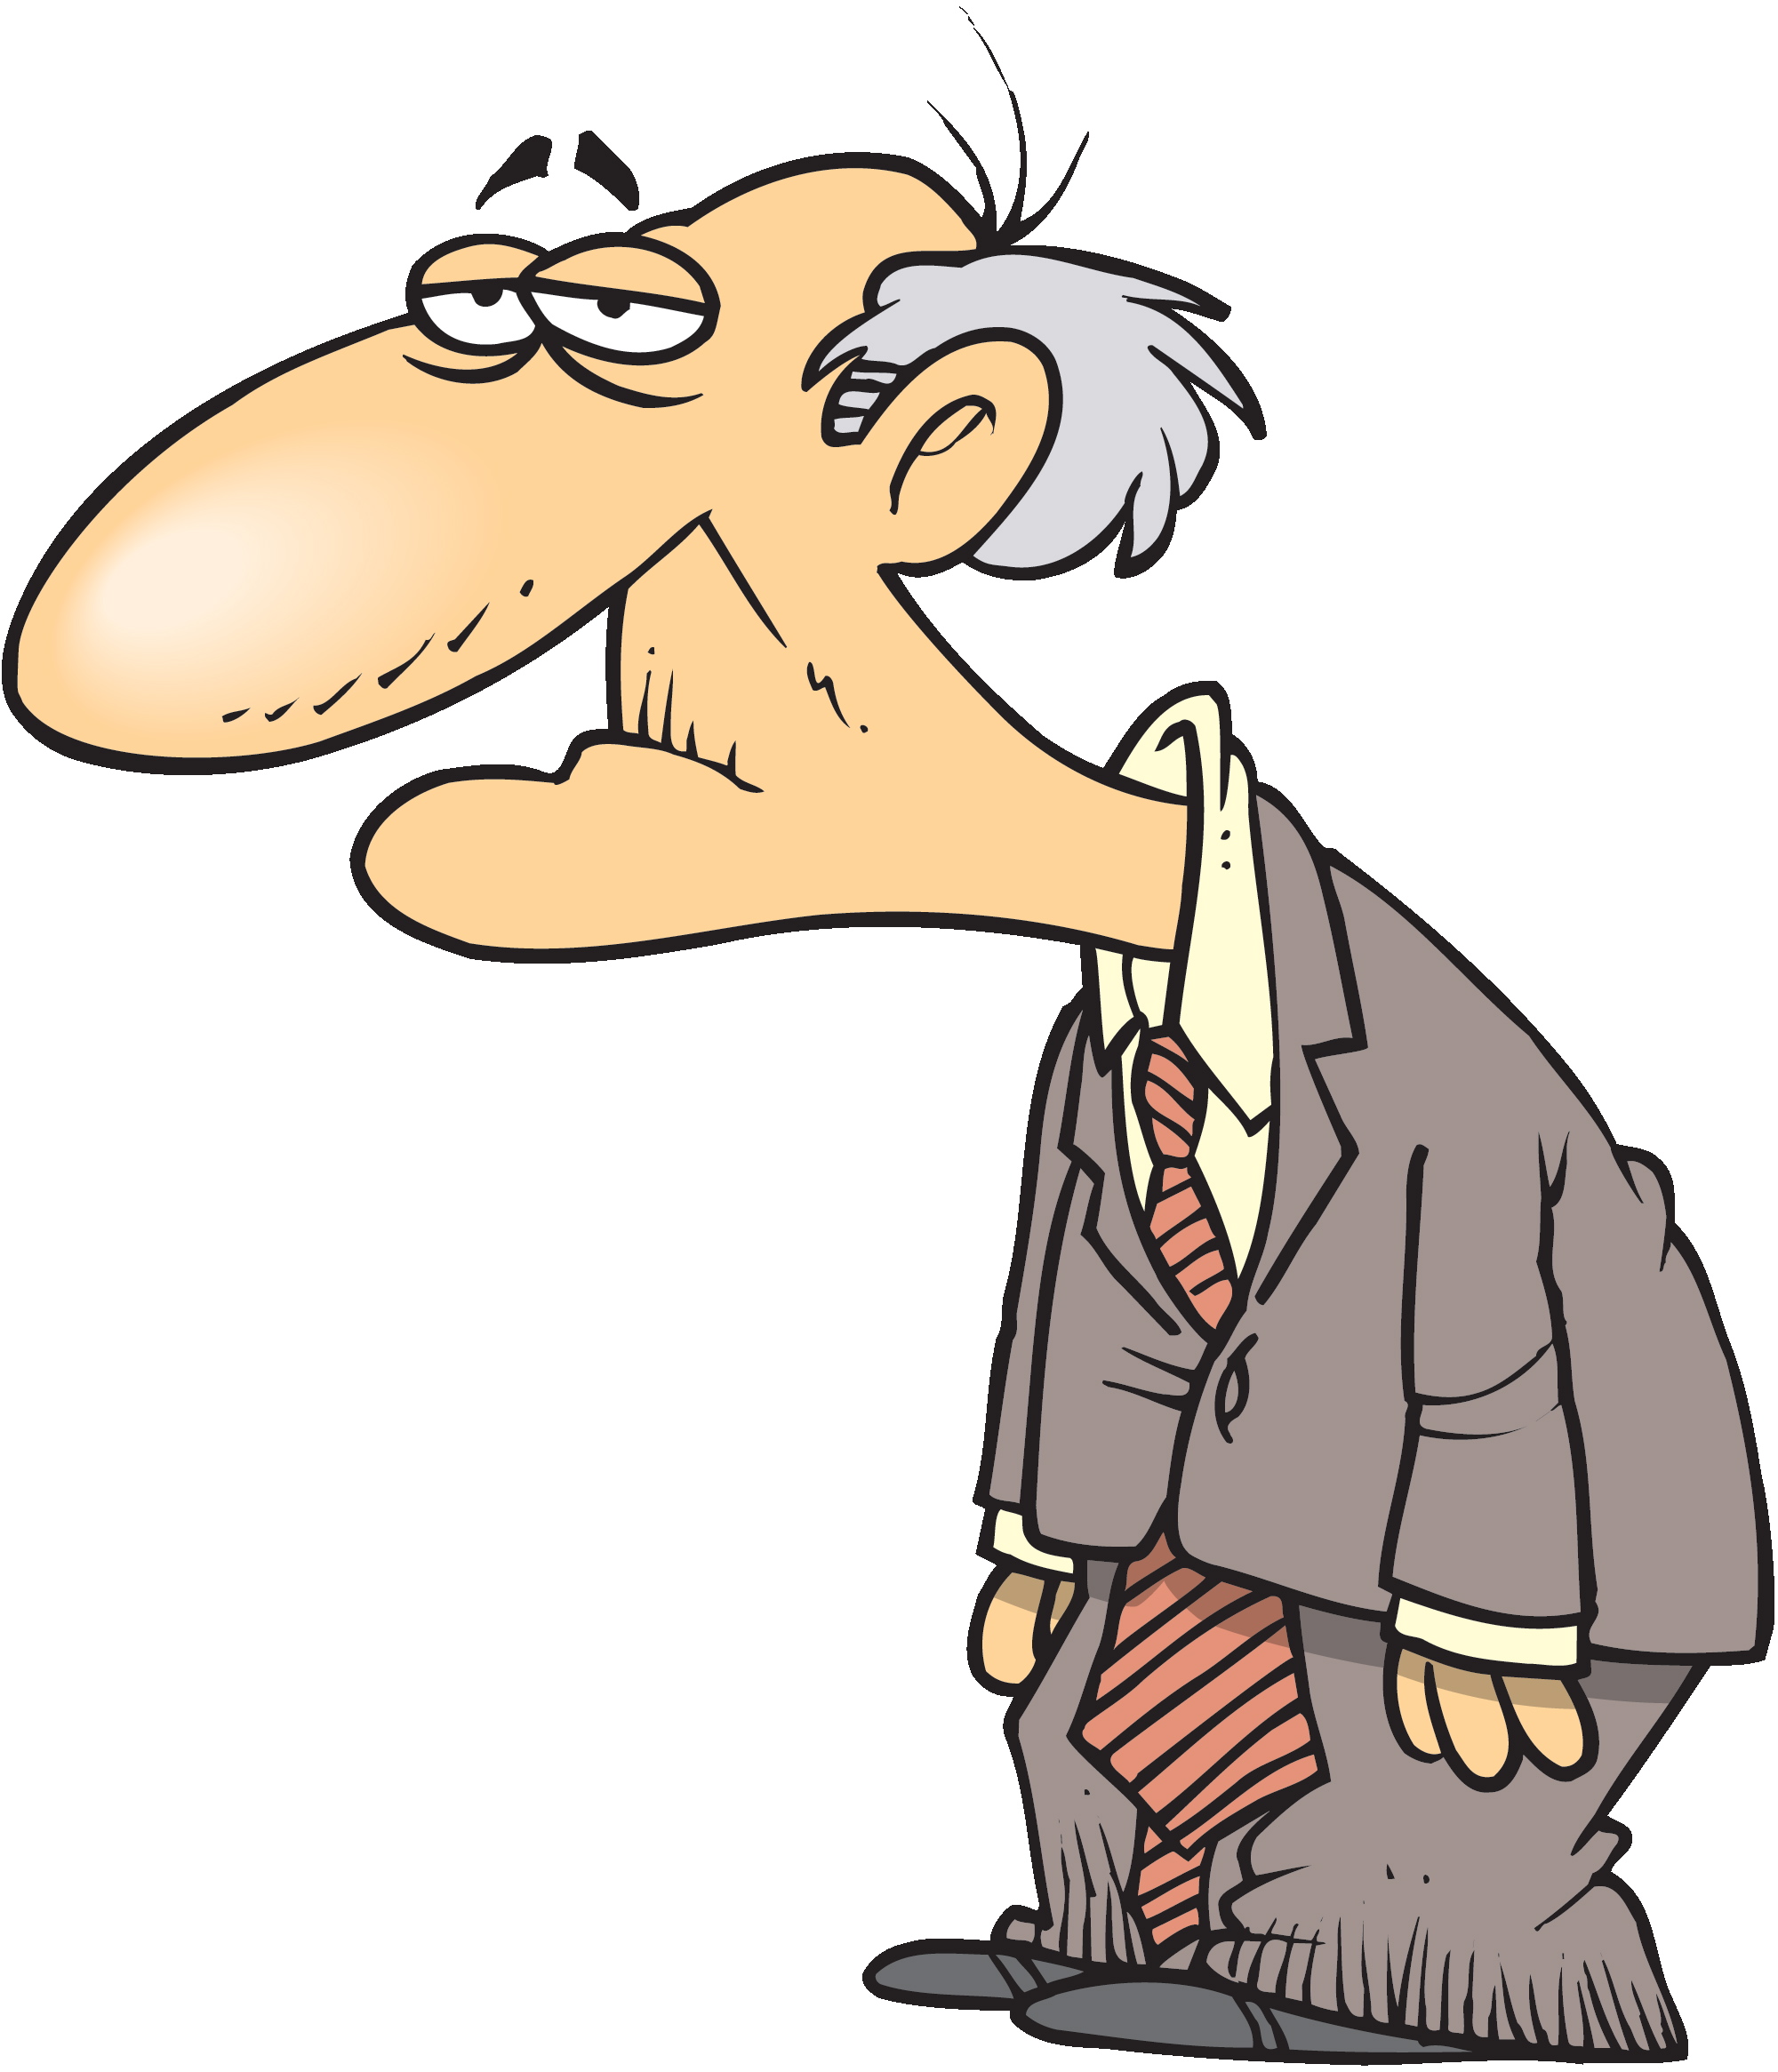 Tired Cartoon Image - ClipArt Best